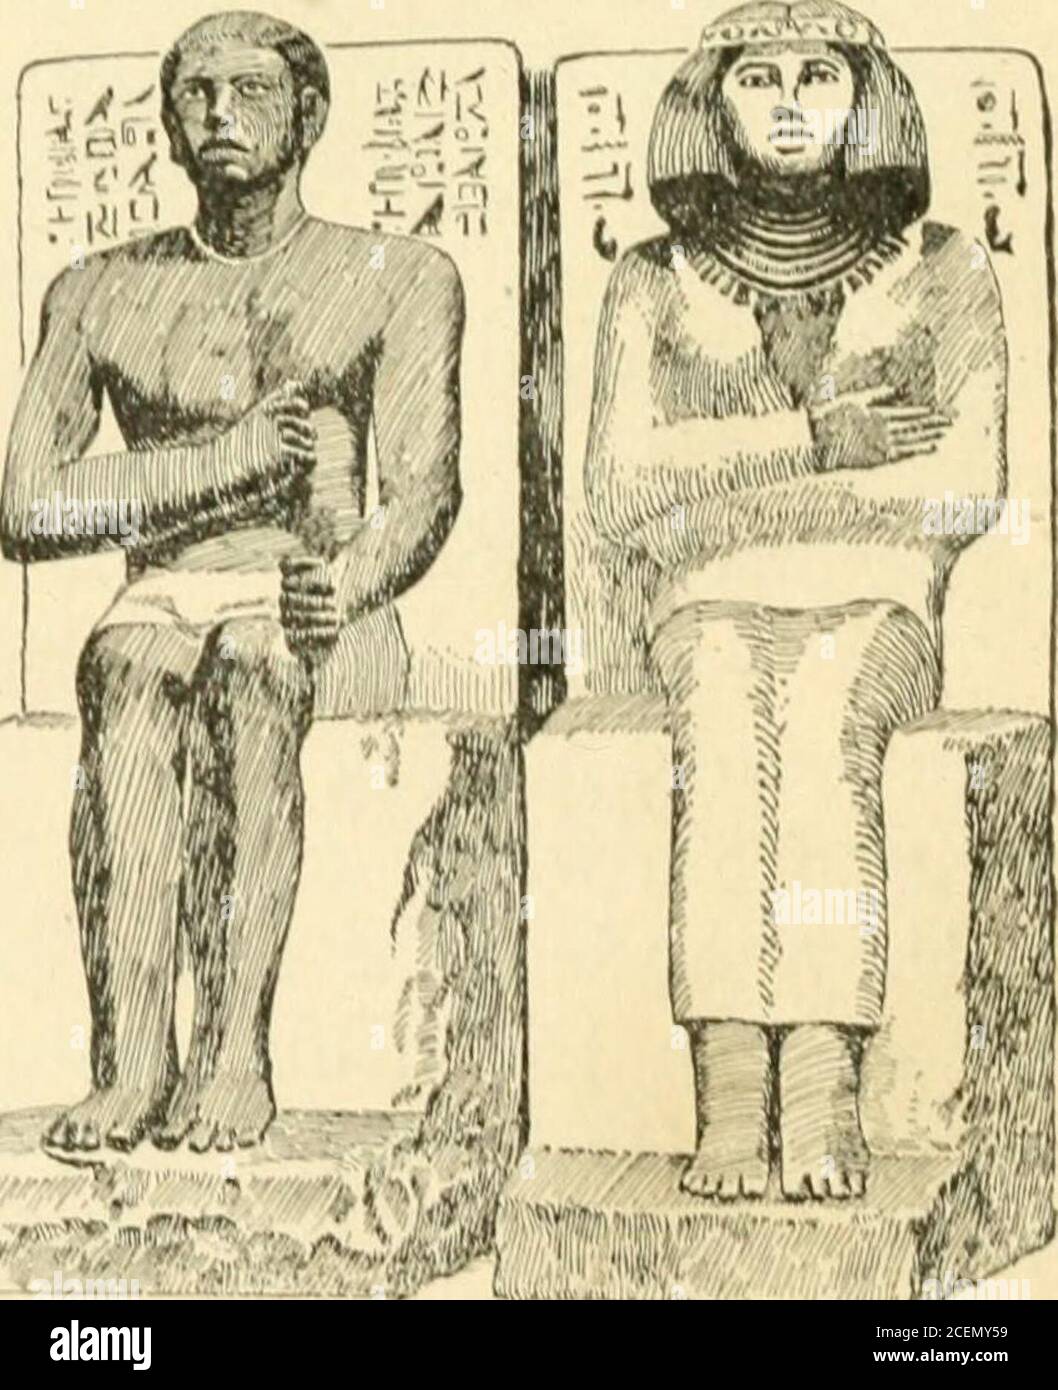 . The story of the ancient nations : a text-book for high schools. o developedthe copper mines in the Sinaipeninsula, and may be re-garded as the first Egyptianking to engage extensively inenterprises which lay beyondthe narrow boundaries ofEgypt. 16. Art Under the OldKingdom.— Near the pyra-mid of Snefru, explorers have found the tombs of some ofthe nobles of his court. The statues of one of these noblesDarned Rahotep, and of hiswife Nefert, may still be seenin the Museum at Cairo, inEgypt. The portraits are evi-dently quite true to life, andpicture a typical Egyptiancouple of the higher clas Stock Photo